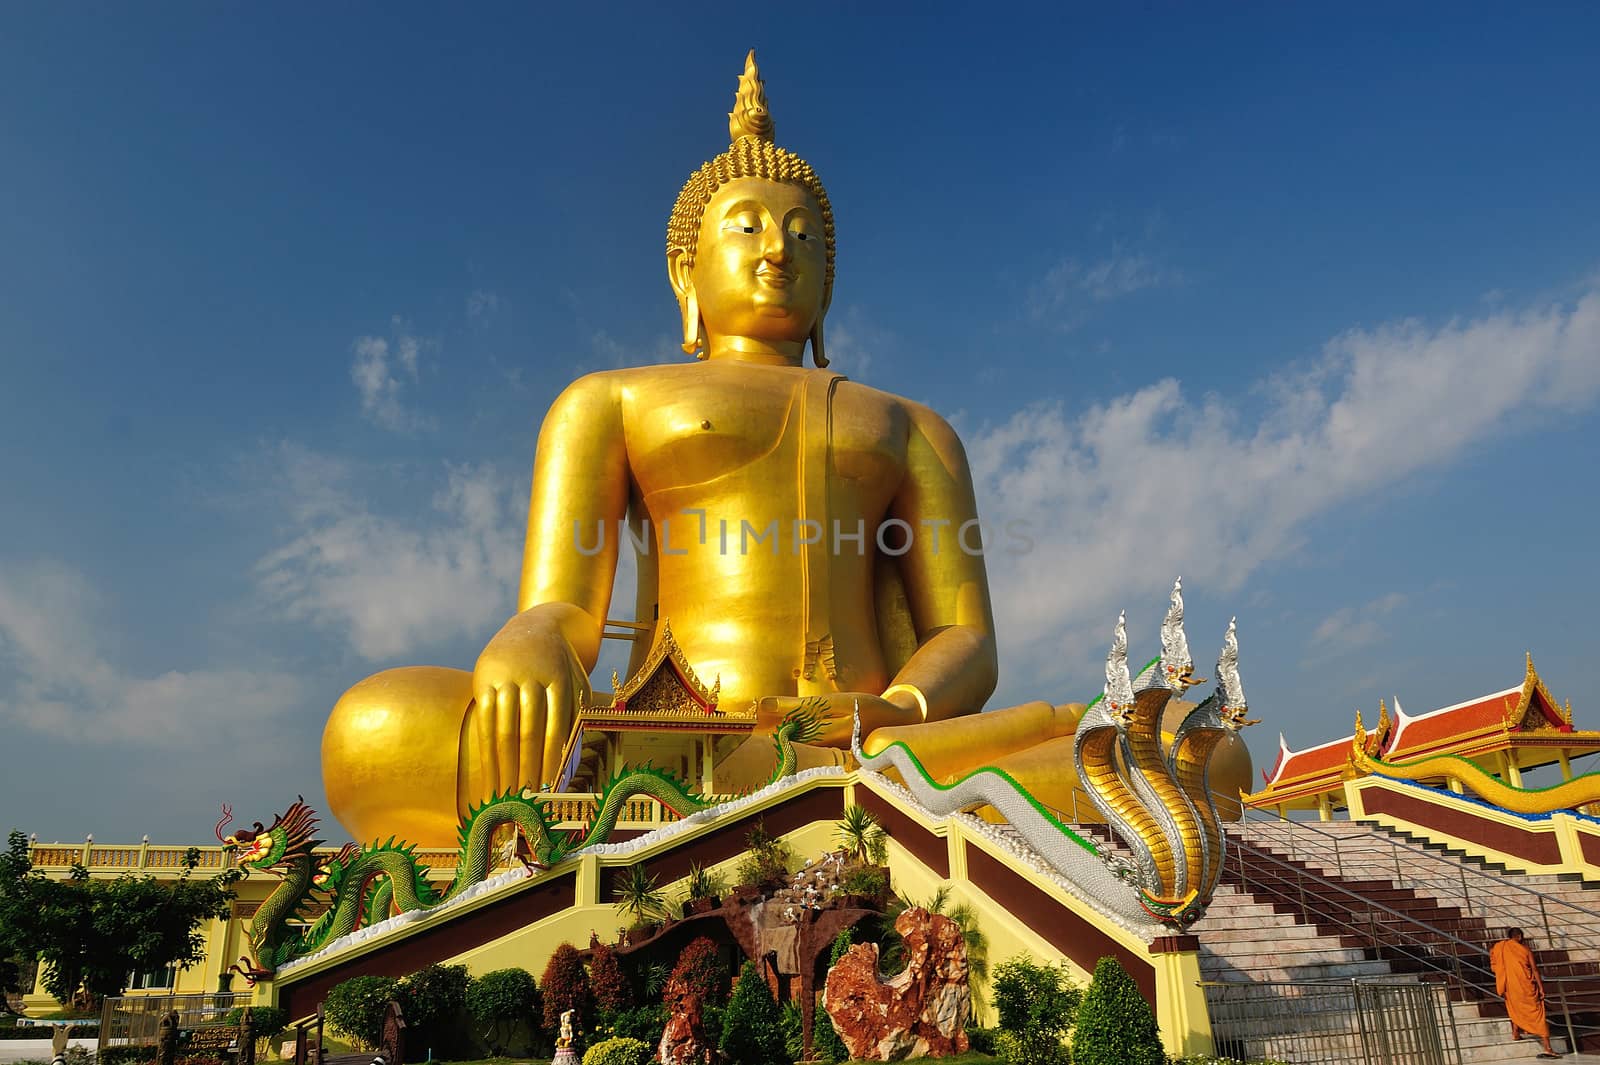 Golden Buddha statue at Wat Muang in Angthong, Thailand by think4photop